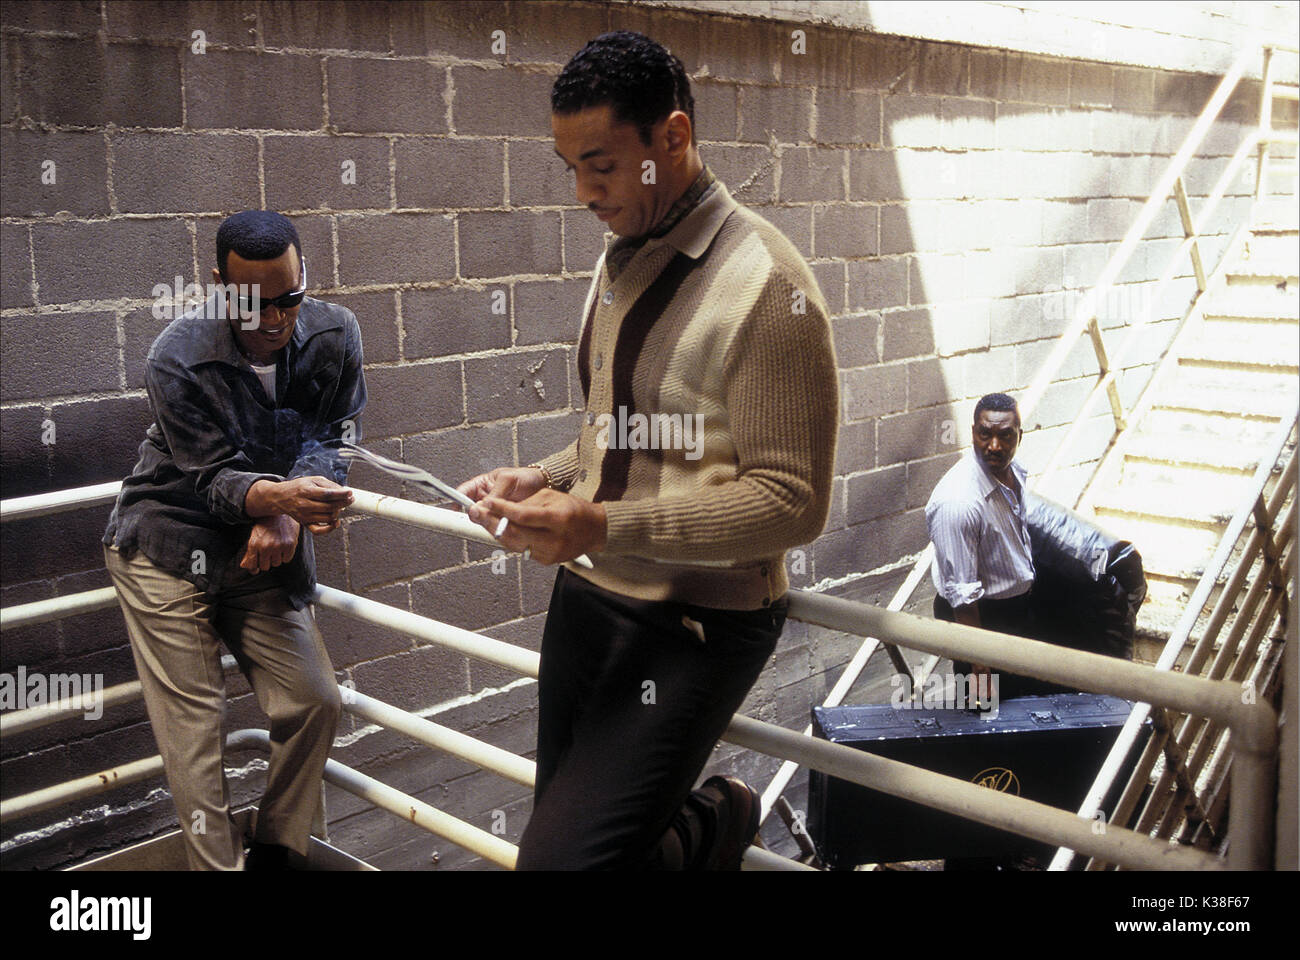 RAY JAMIE FOXX, CLIFTON POWELL AND HARRY LENNIX A UNIVERSAL RLEASE FROM THE RONALD GRANT ARCHIVE     Date: 2004 Stock Photo